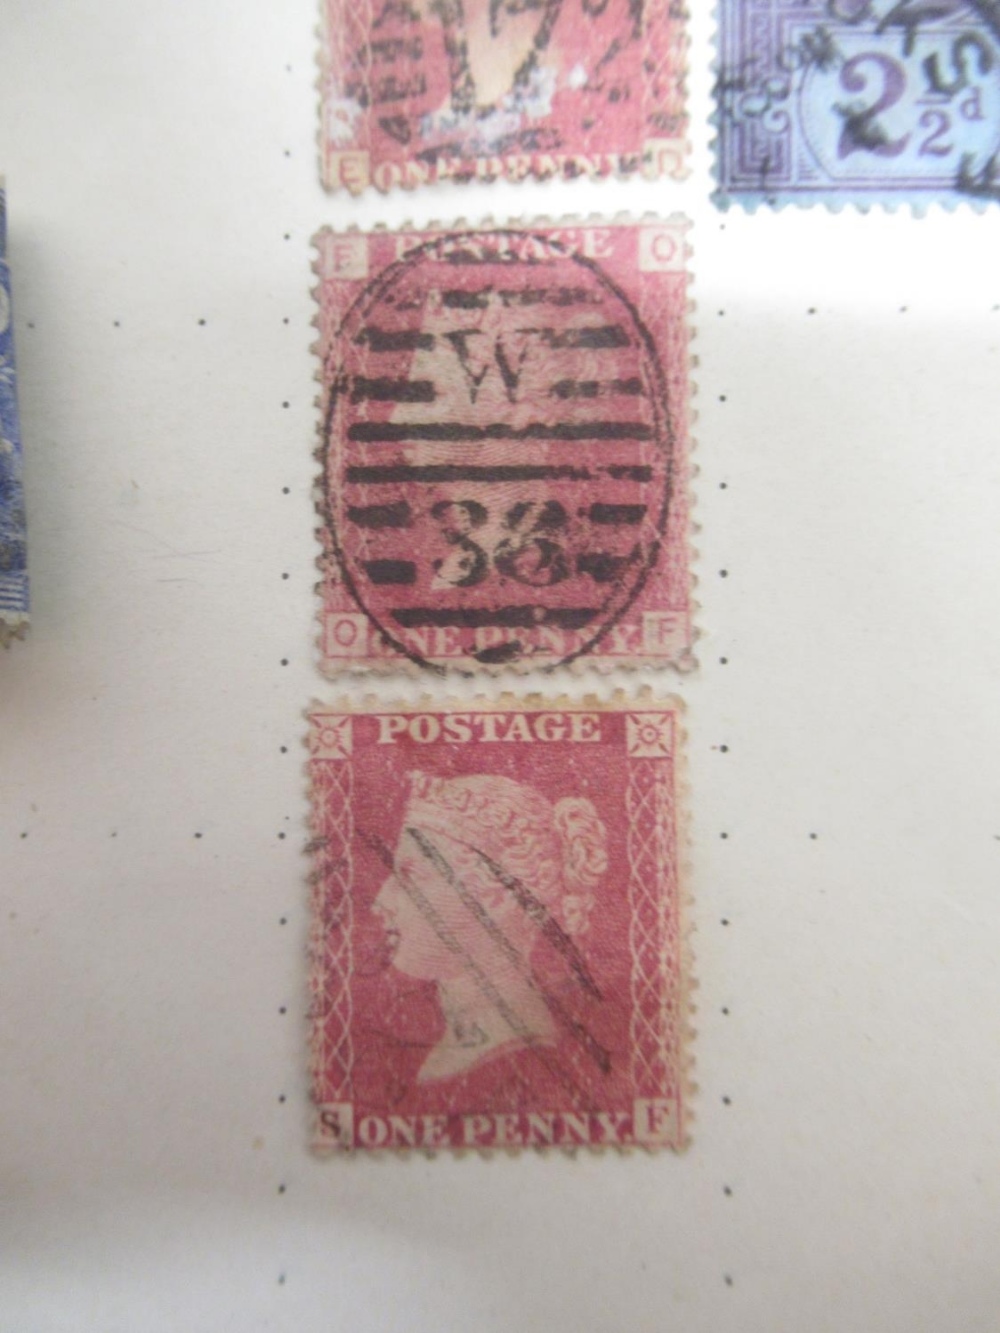 The Strand Stamp Album cont. 5 used penny reds, red and green folders cont. c20th British stamps, - Bild 7 aus 14